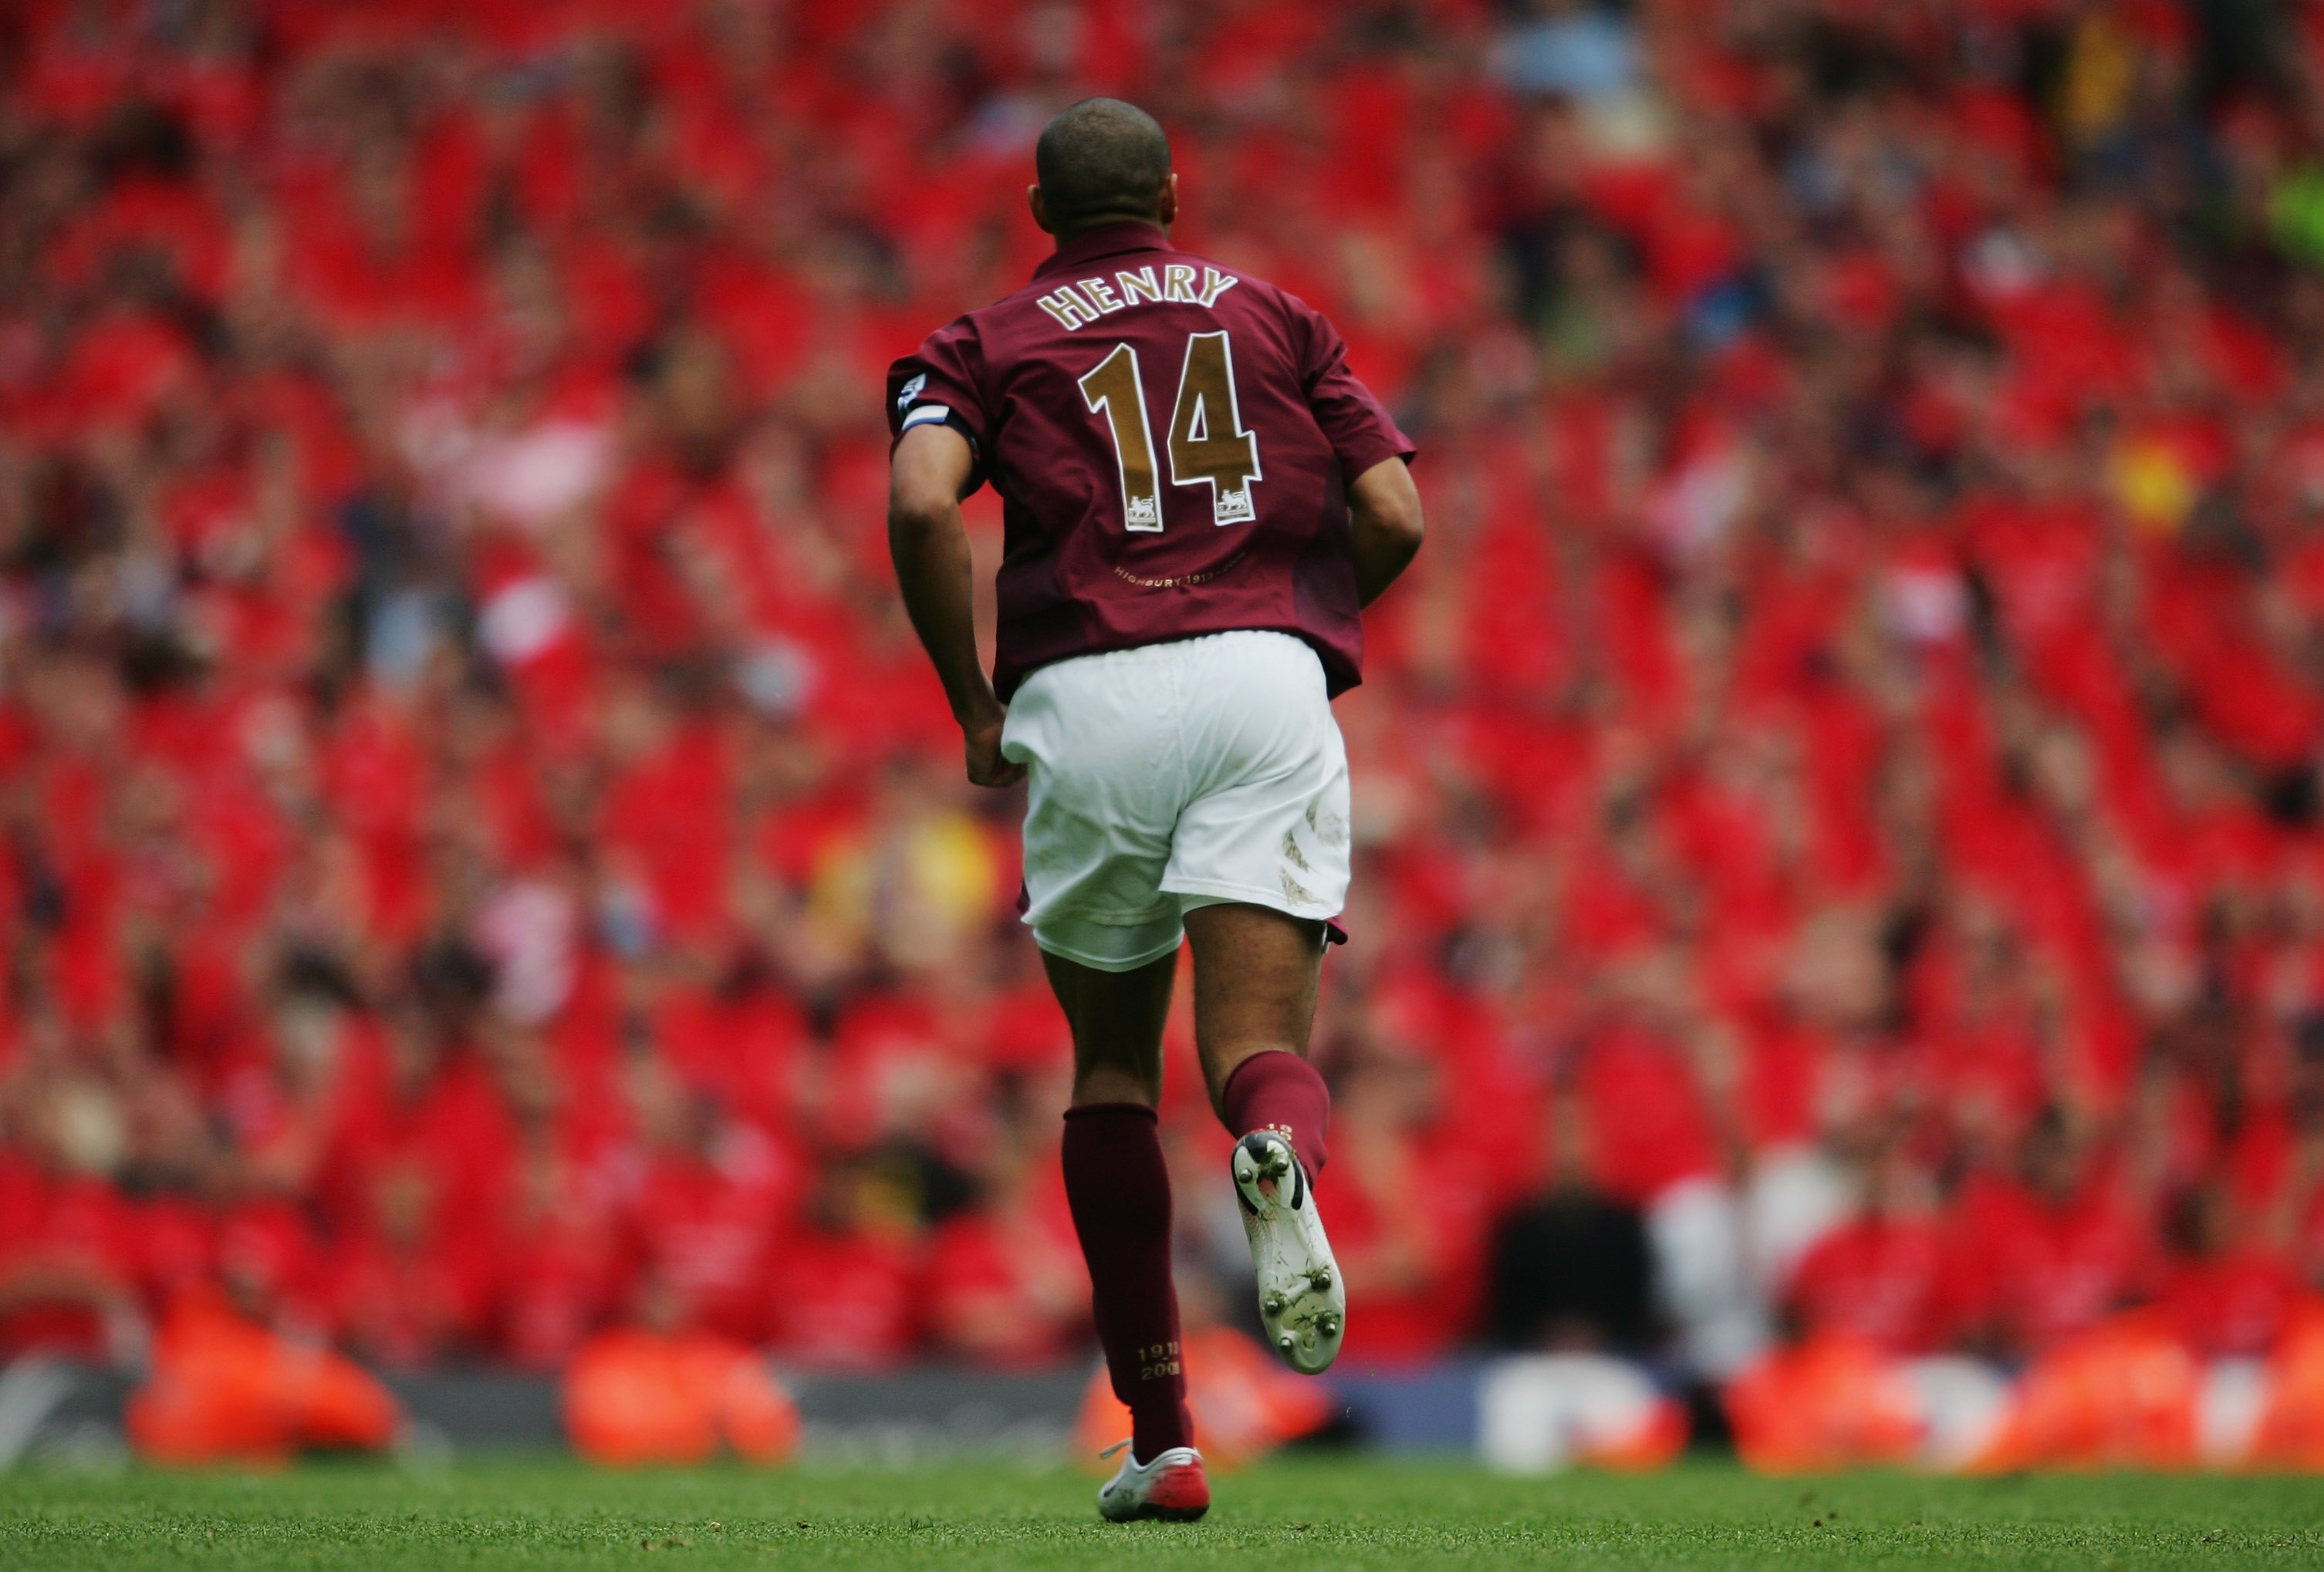 thierry henry, sports, arsenal f c, soccer